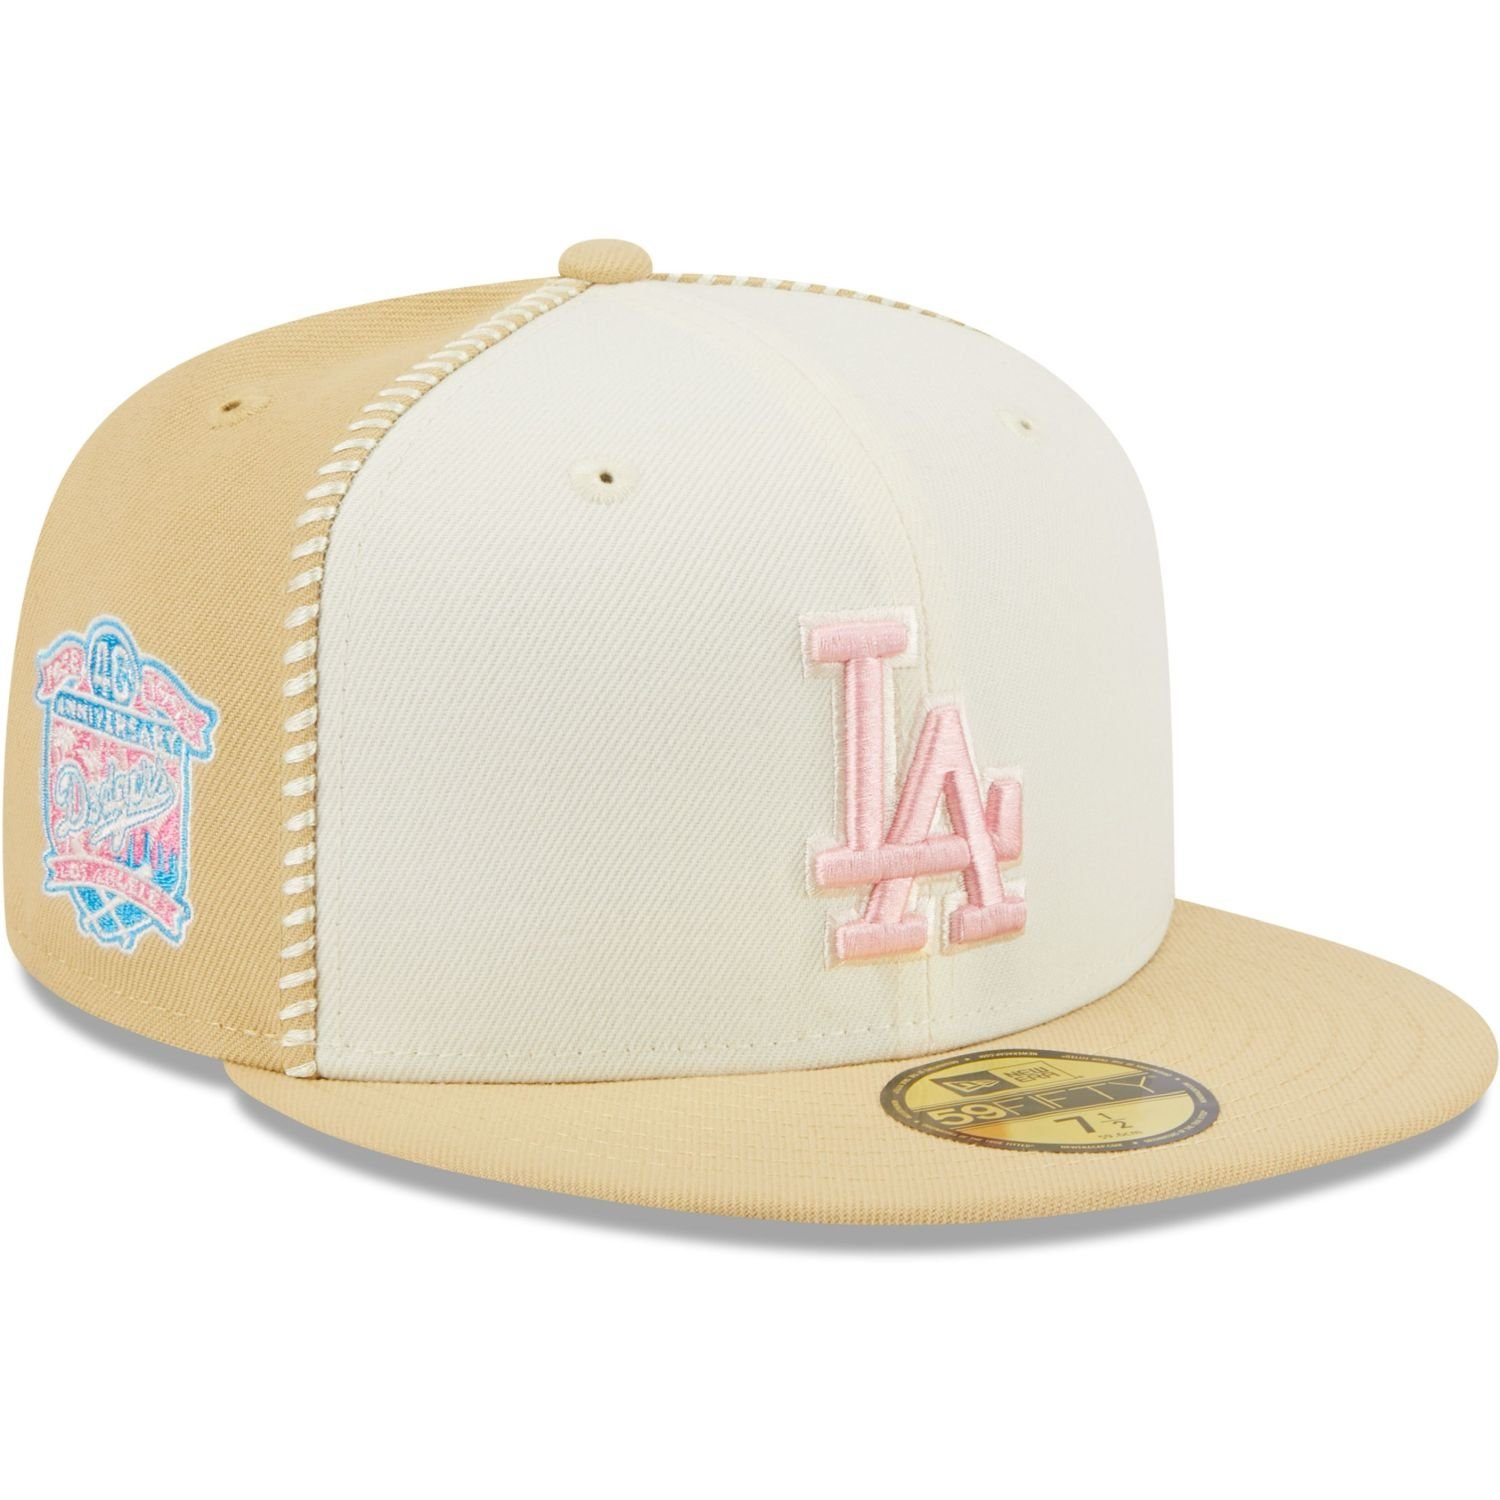 New Fitted Cap Dodgers Angeles 59Fifty SEAM Los Era STITCH